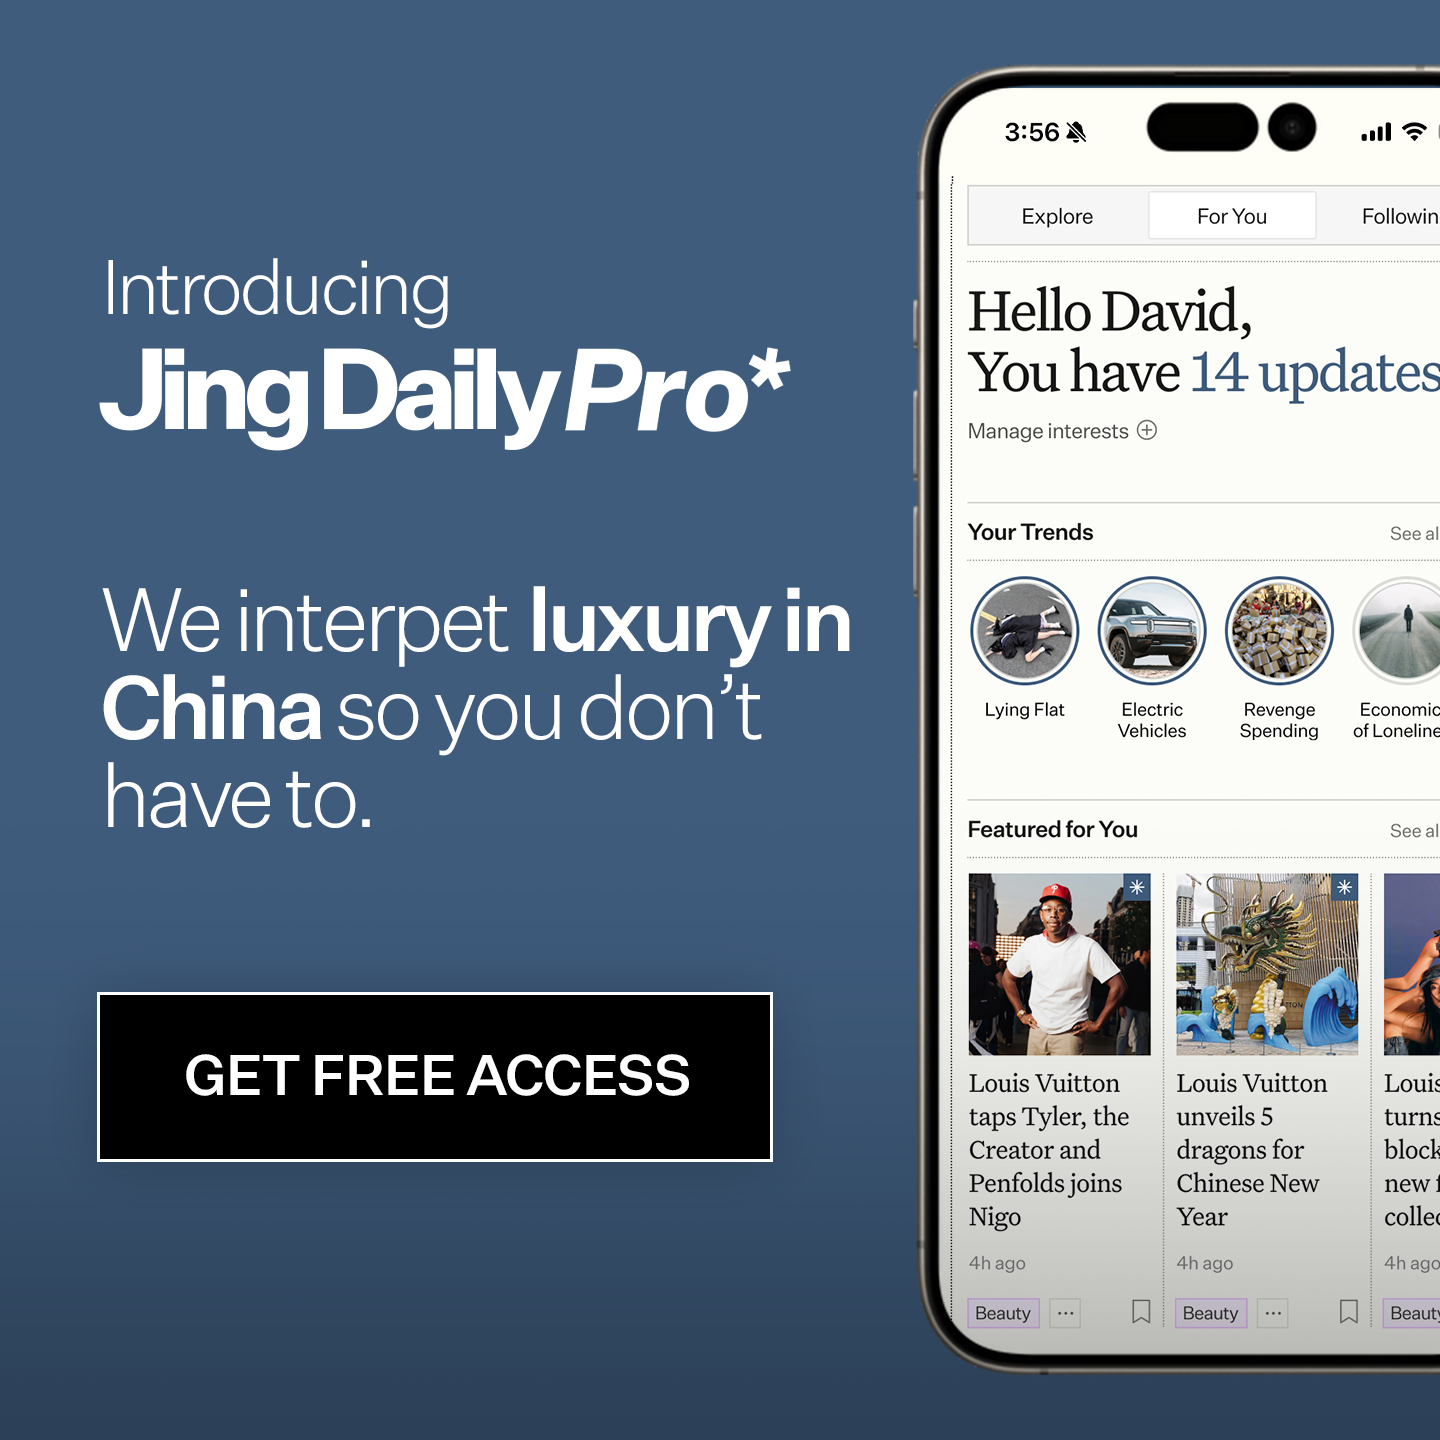 Jing Daily Pro* - Introducing Jing Daily Pro* (v.2)